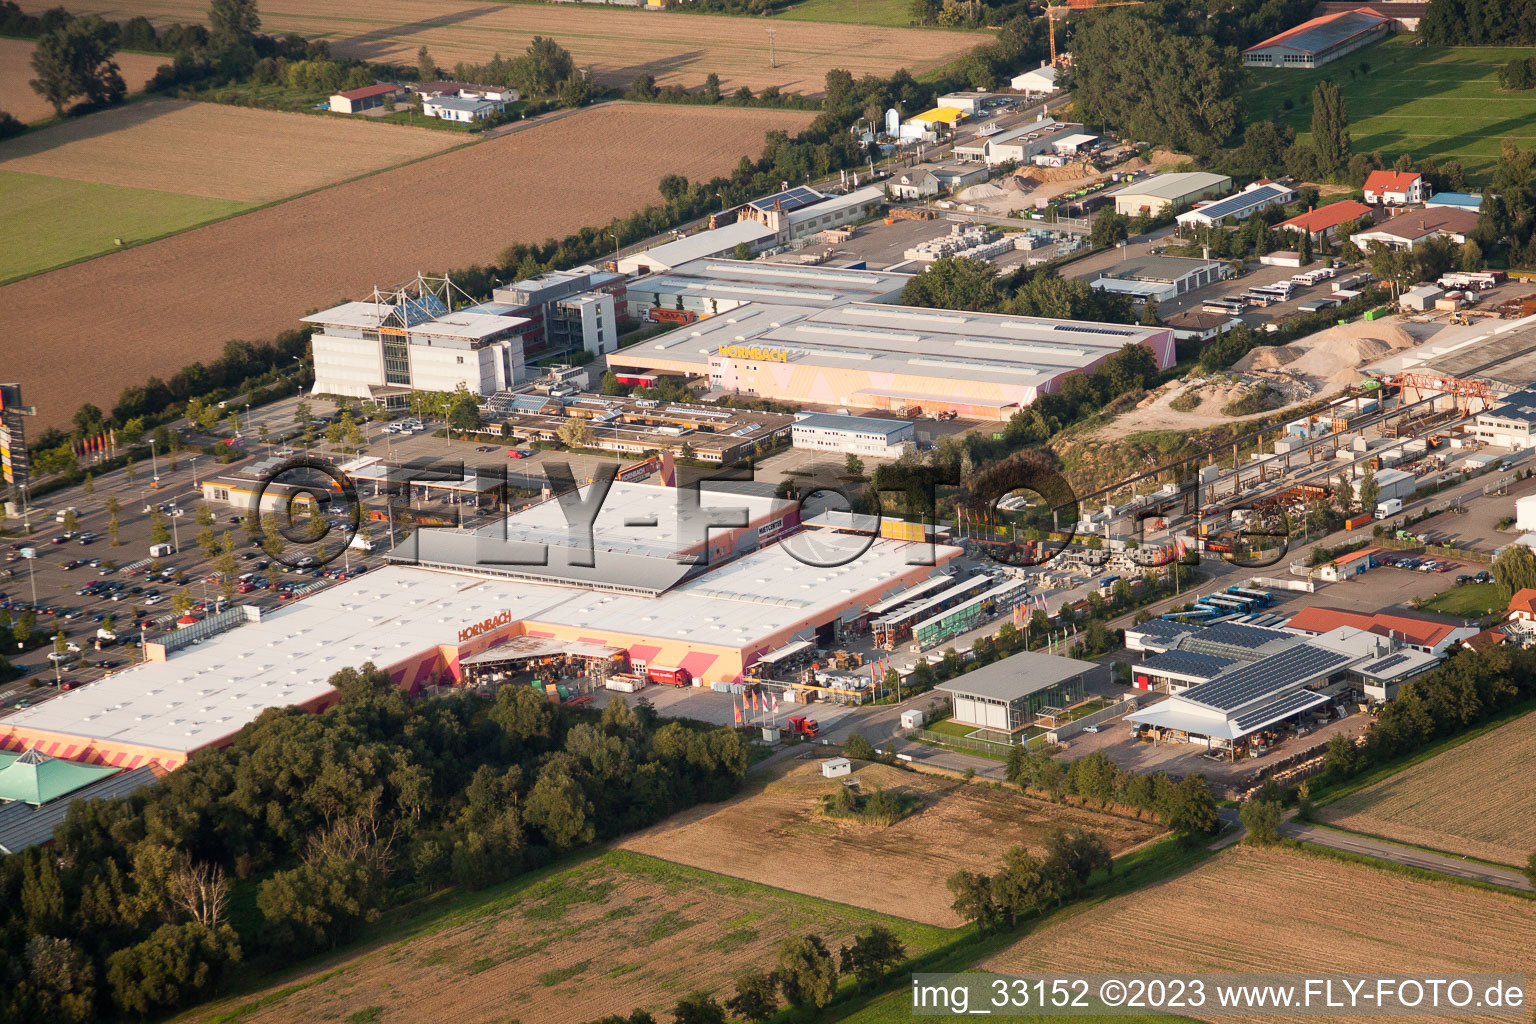 Hornbach construction center in Essingen in the state Rhineland-Palatinate, Germany